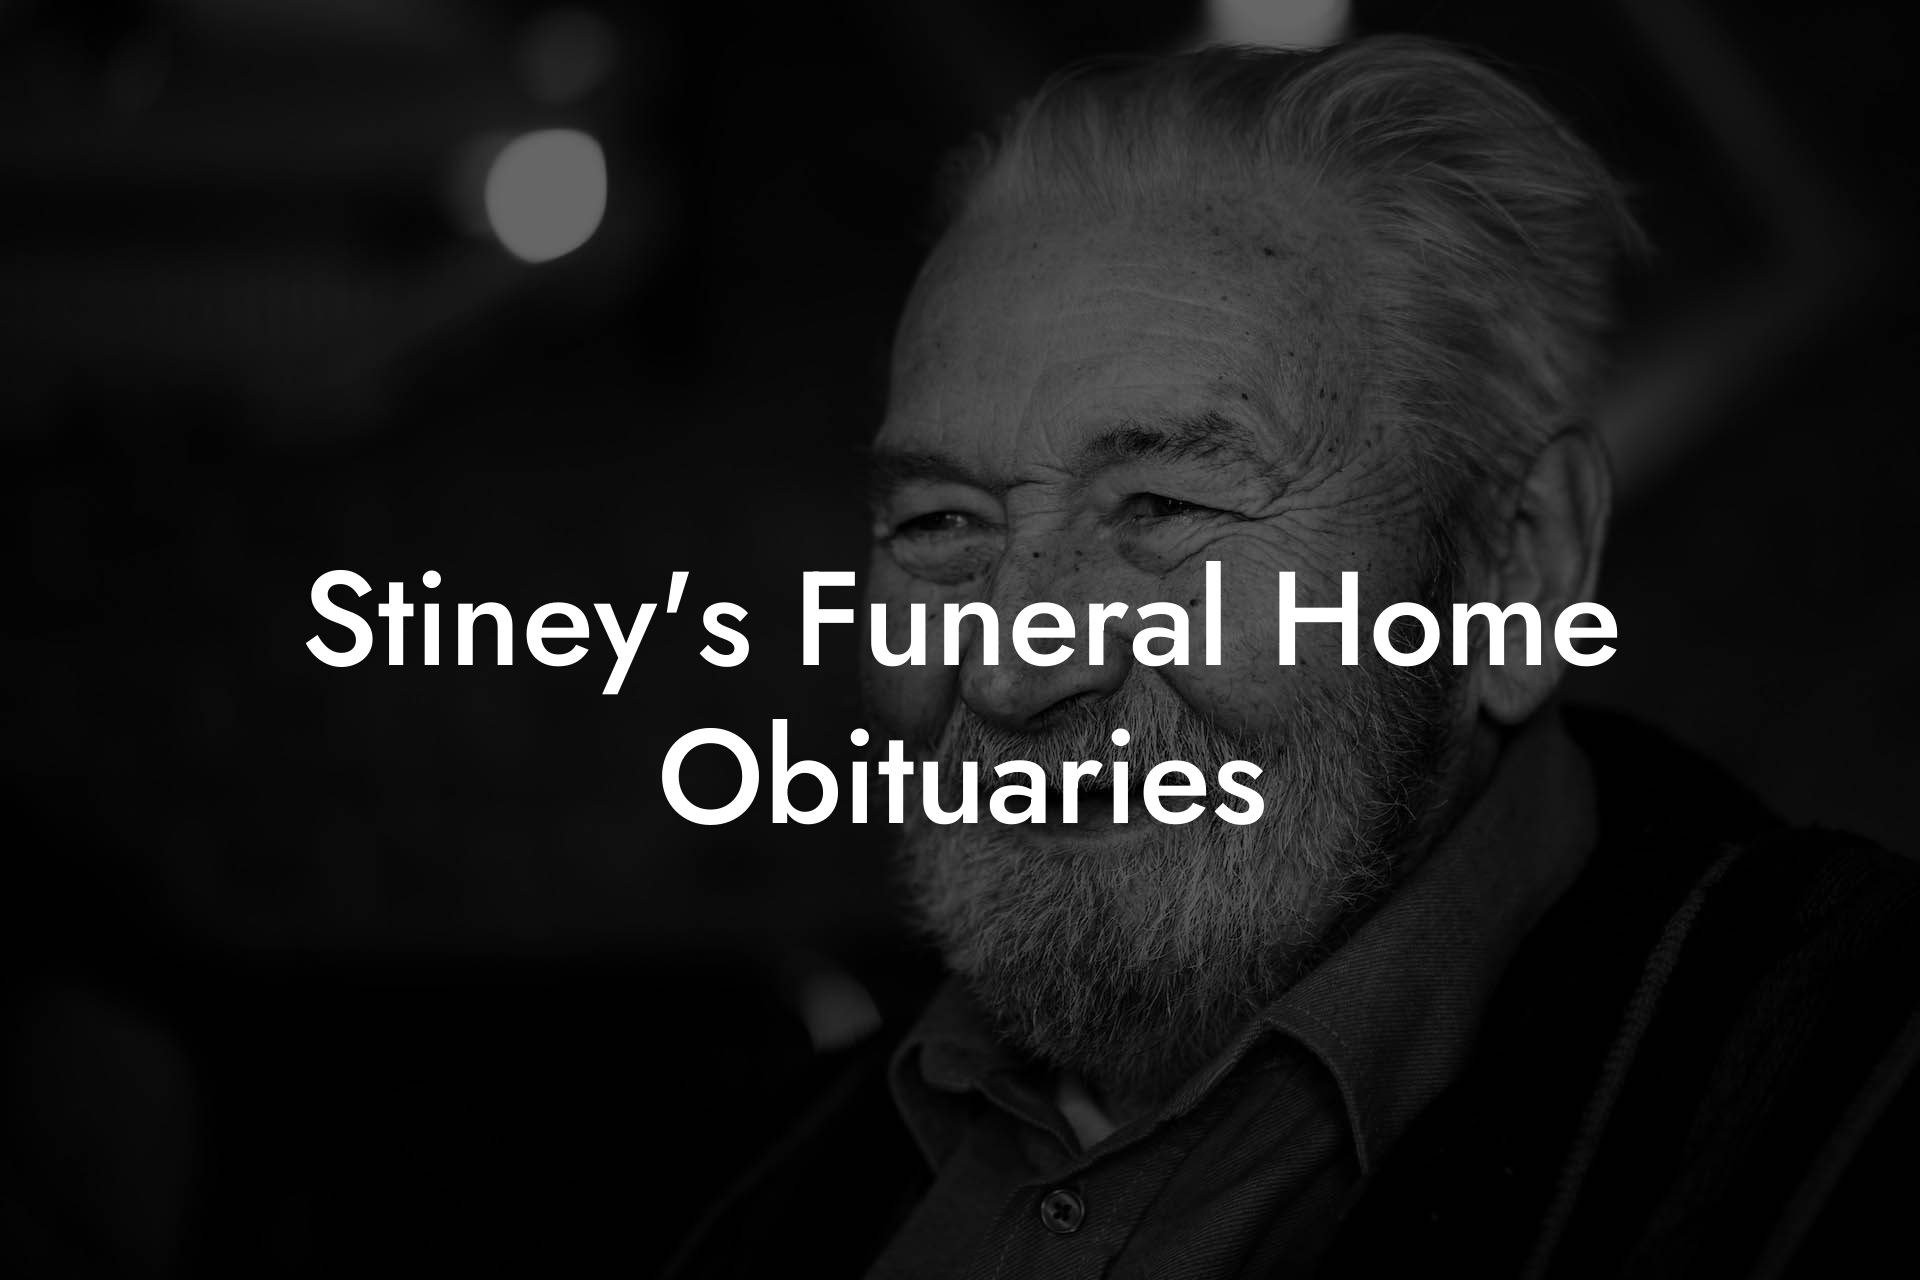 Stiney's Funeral Home Obituaries